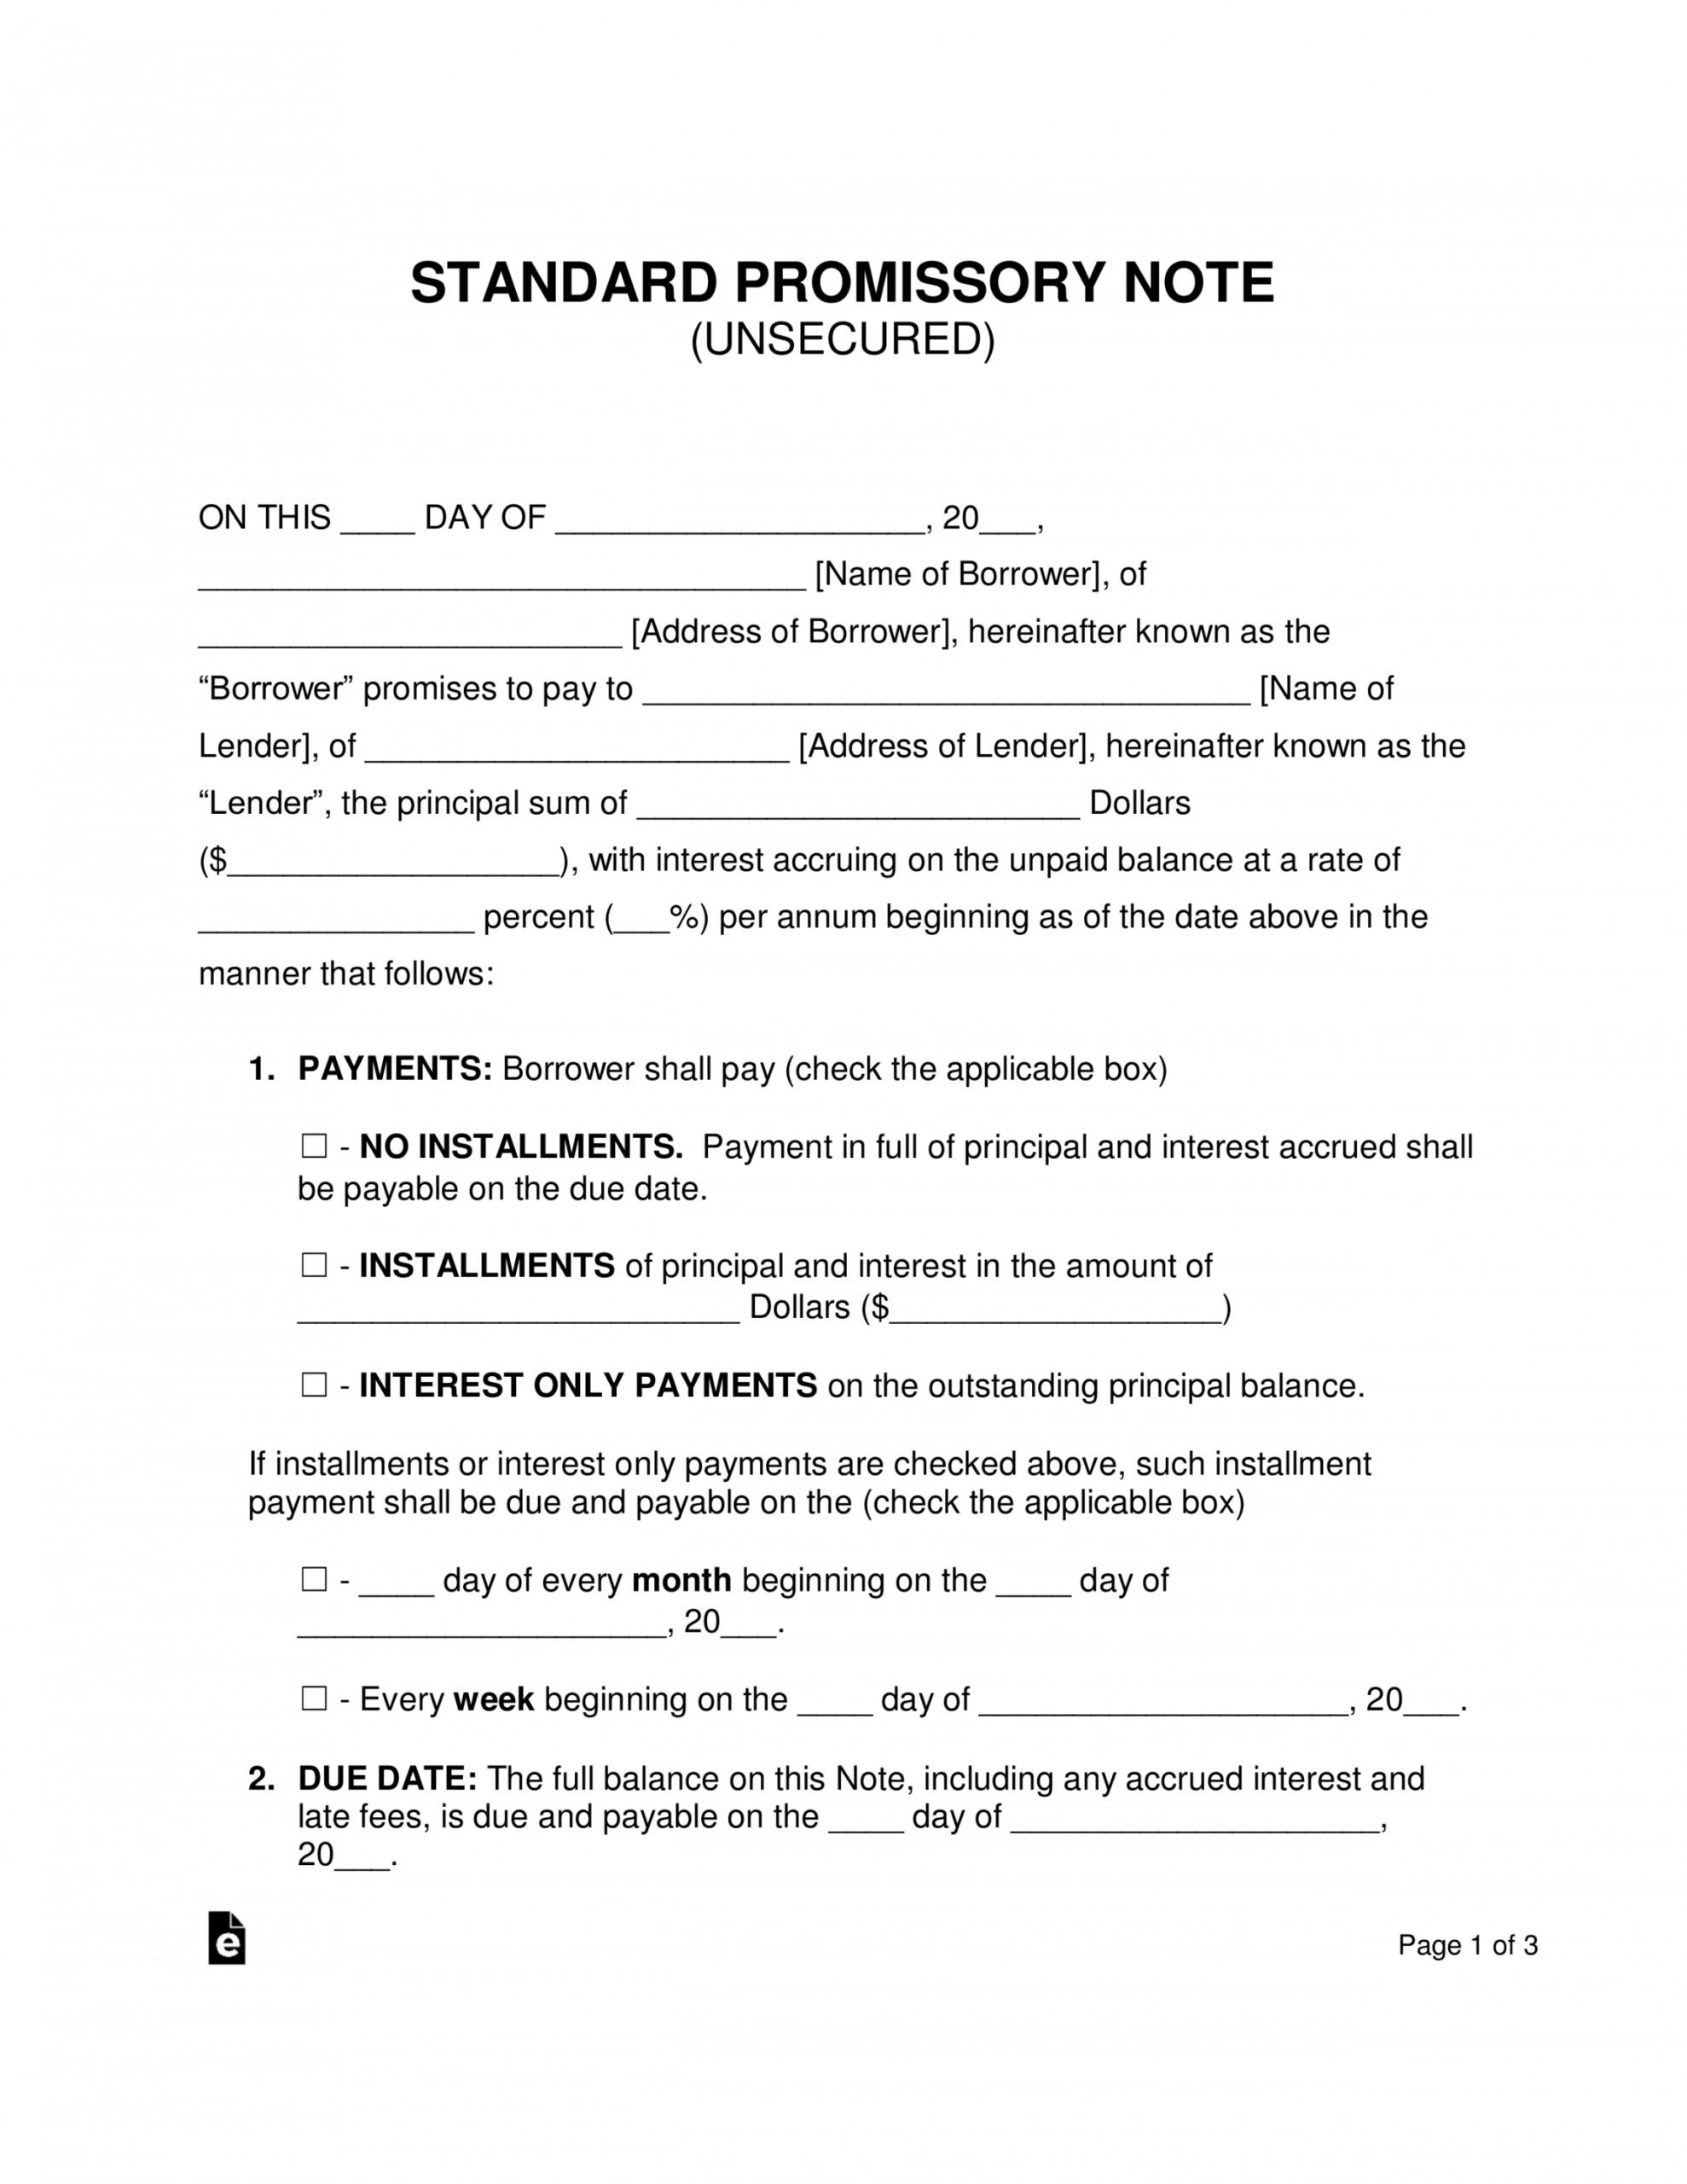 printable free unsecured promissory note template  word  pdf generic promissory note template sample